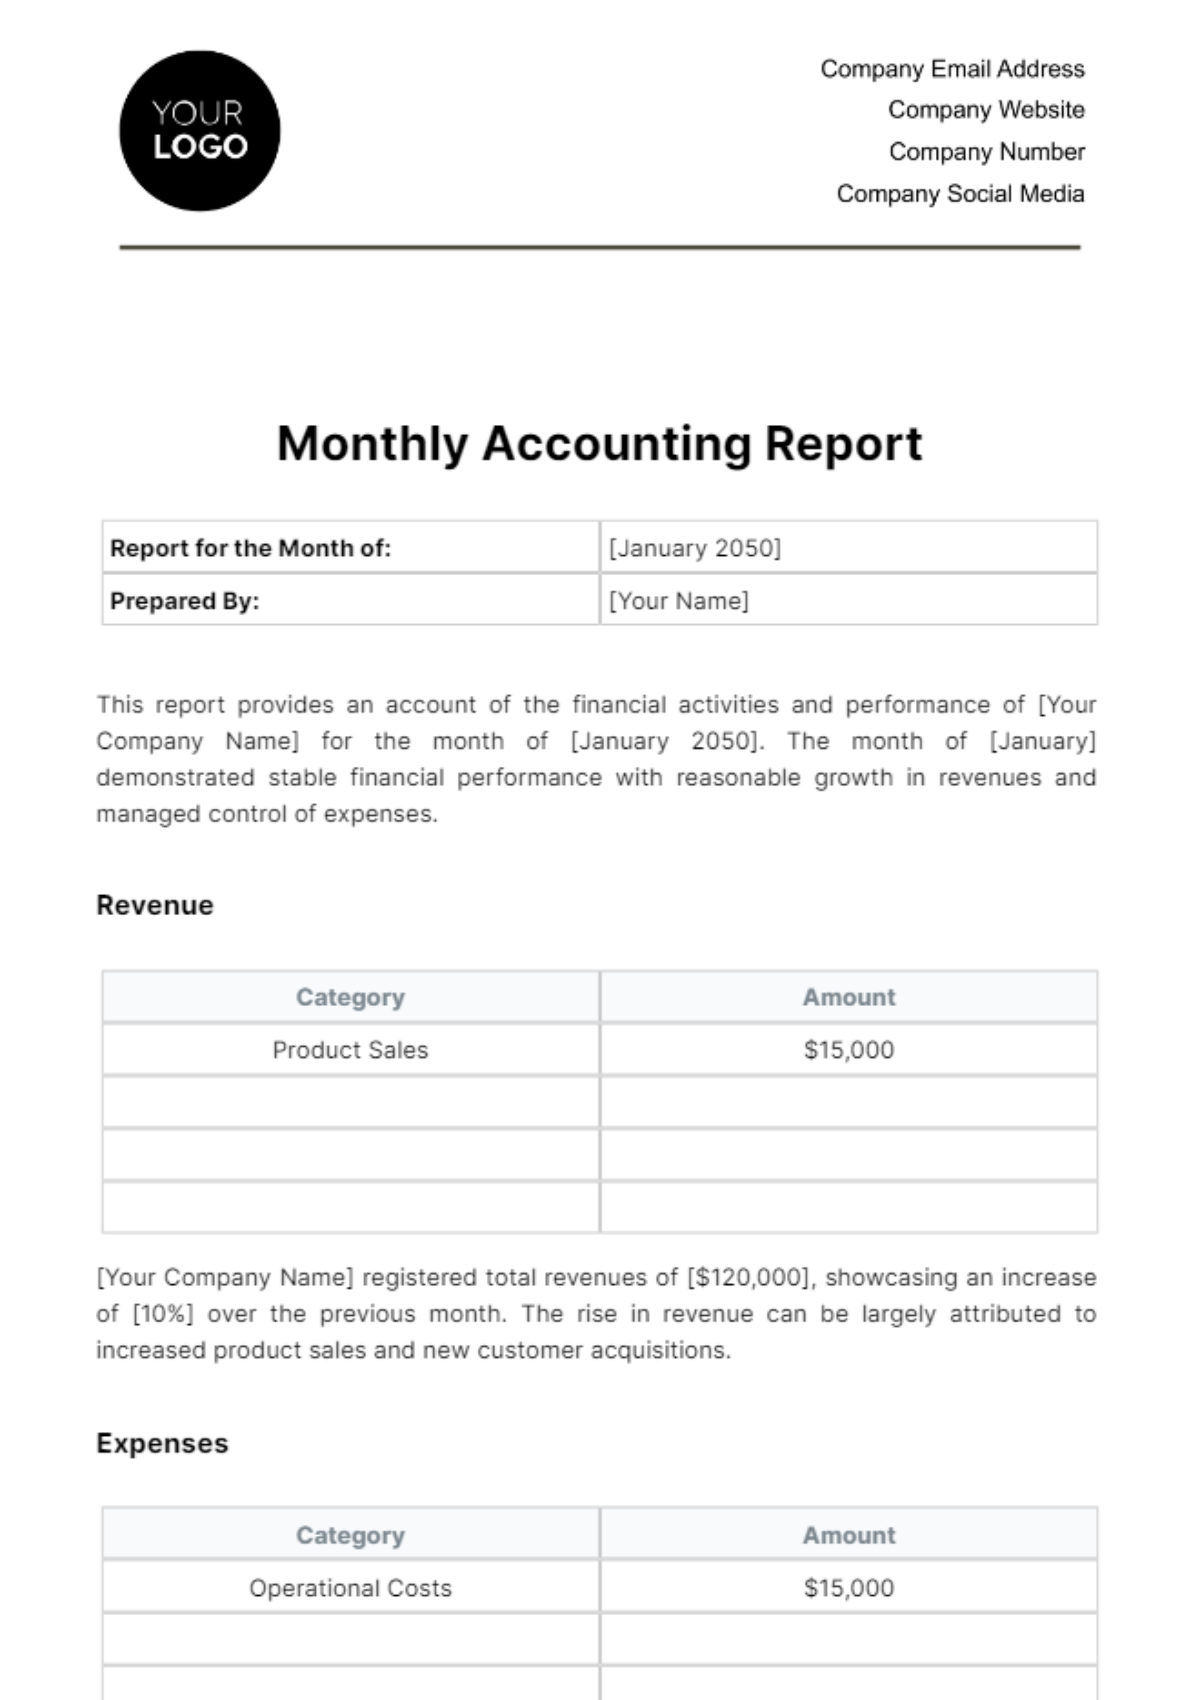 Monthly Accounting Report Template